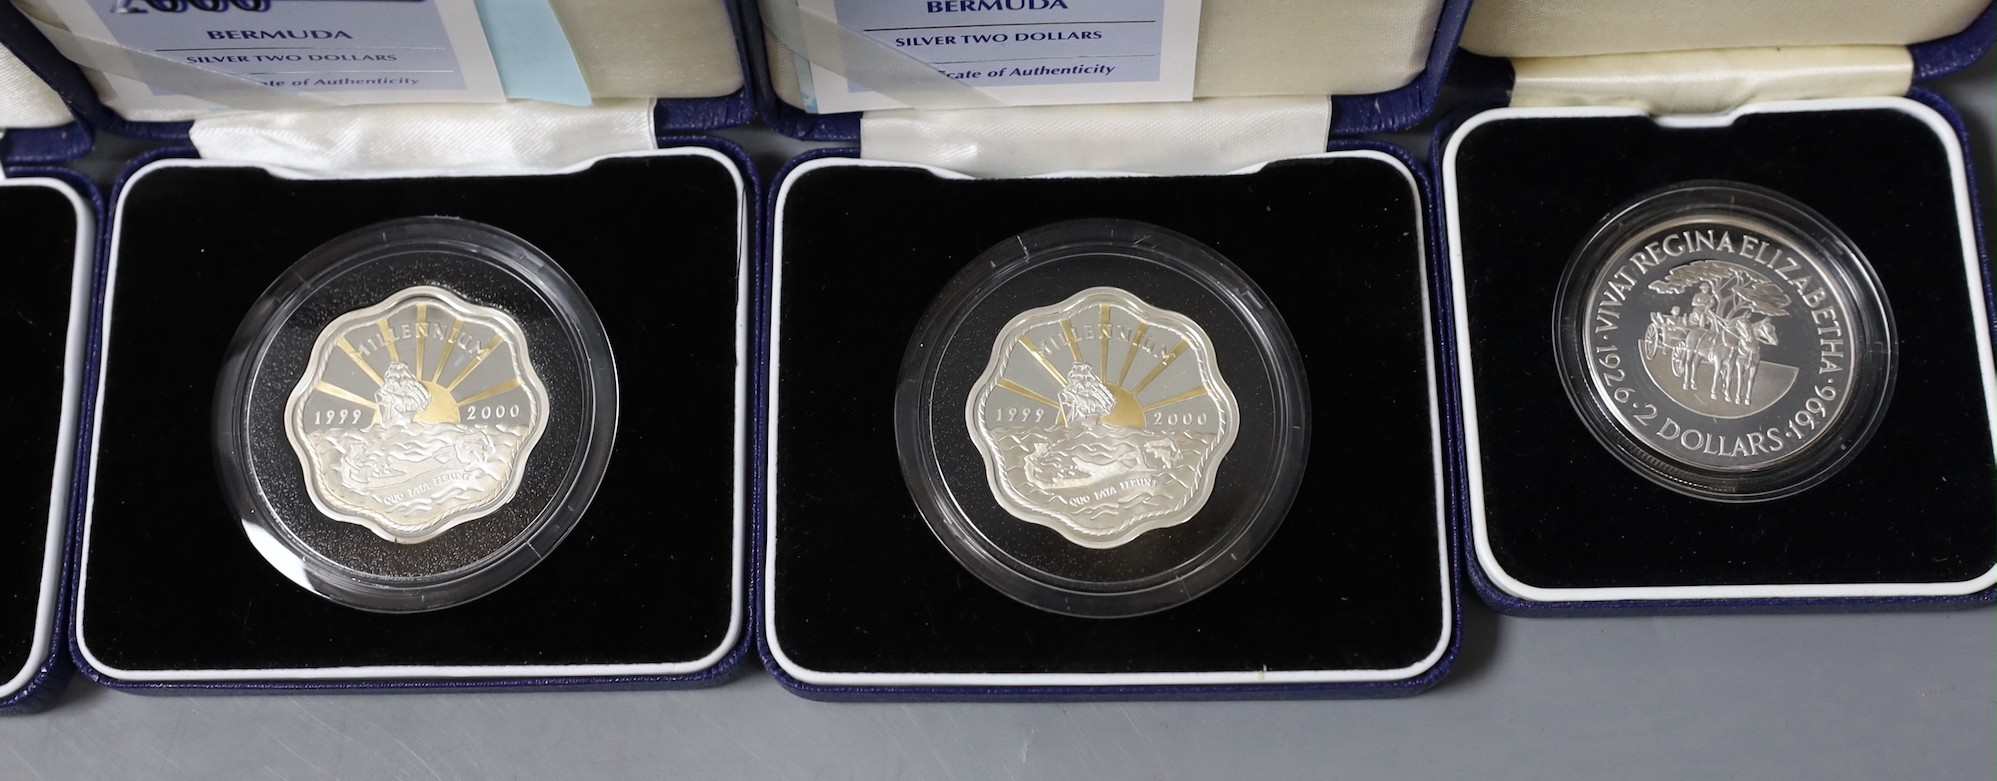 A group of boxed Bermuda silver coins